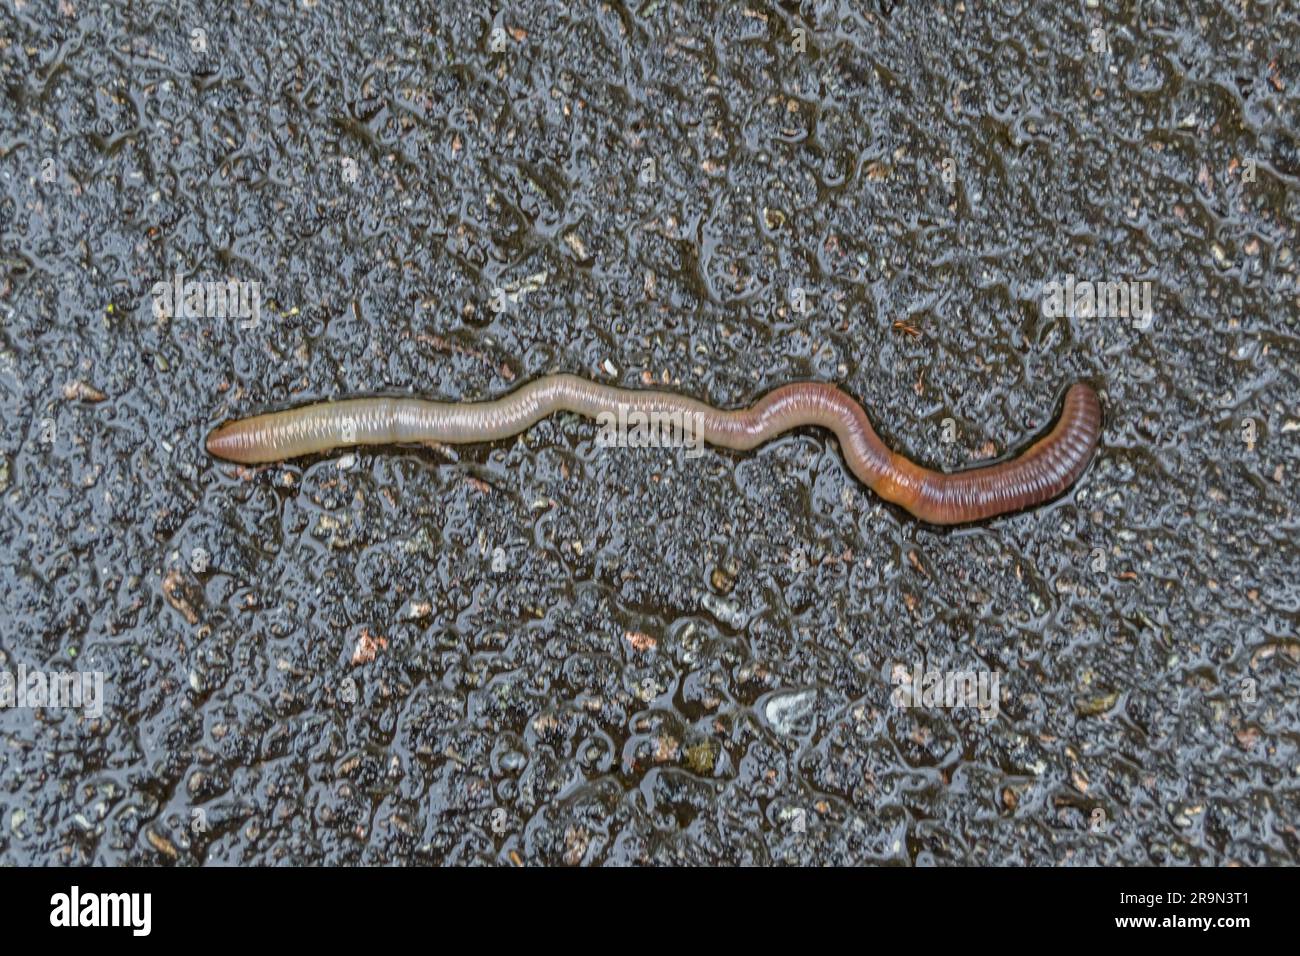 Red earthworm it live bait for fishing isolated on dark background